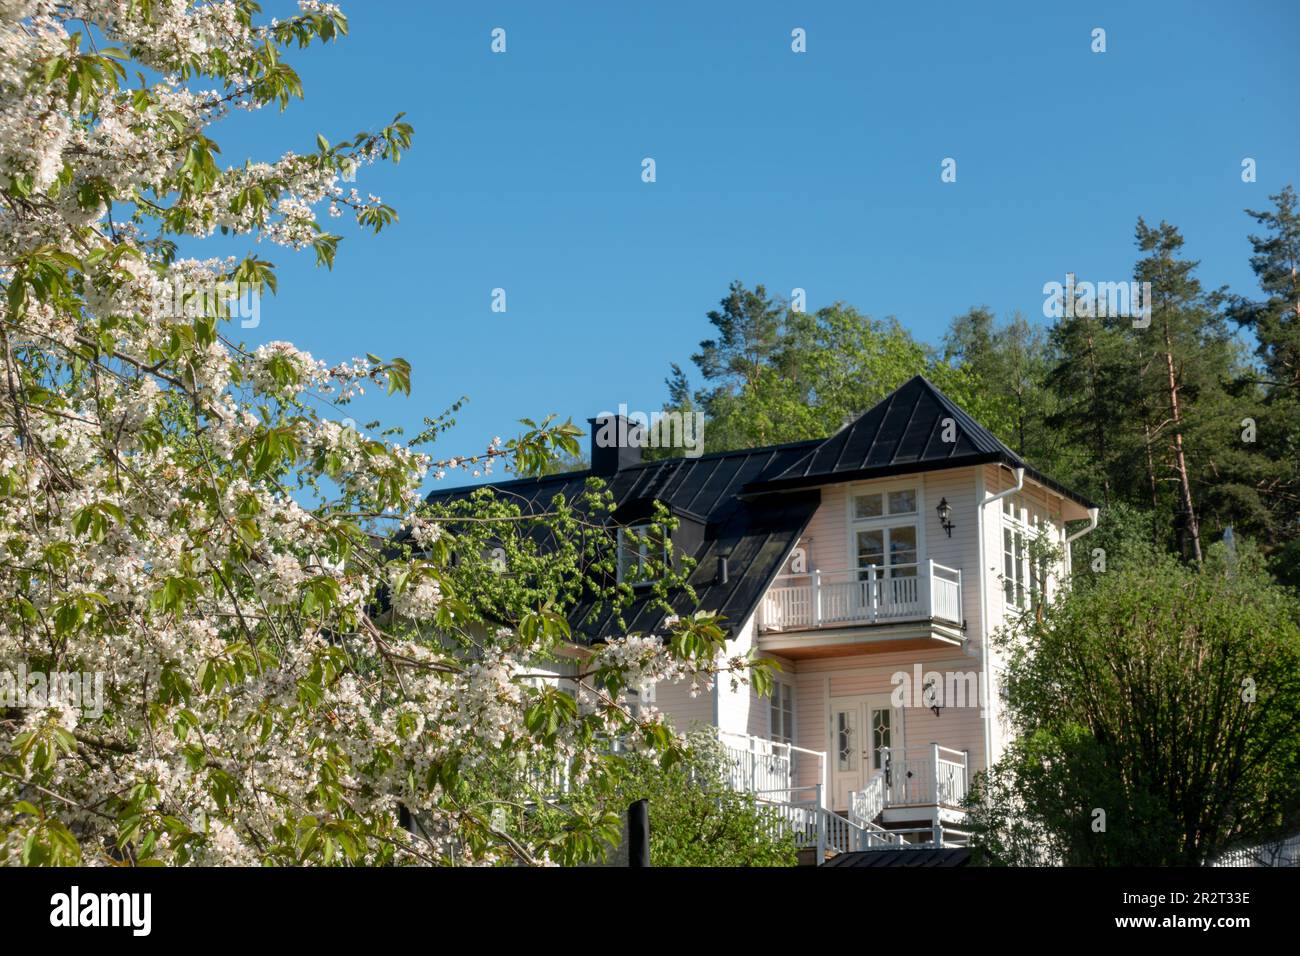 Beautiful Swedish residential single family home in spring with fruit tree blossoming matching the color of the house Stock Photo